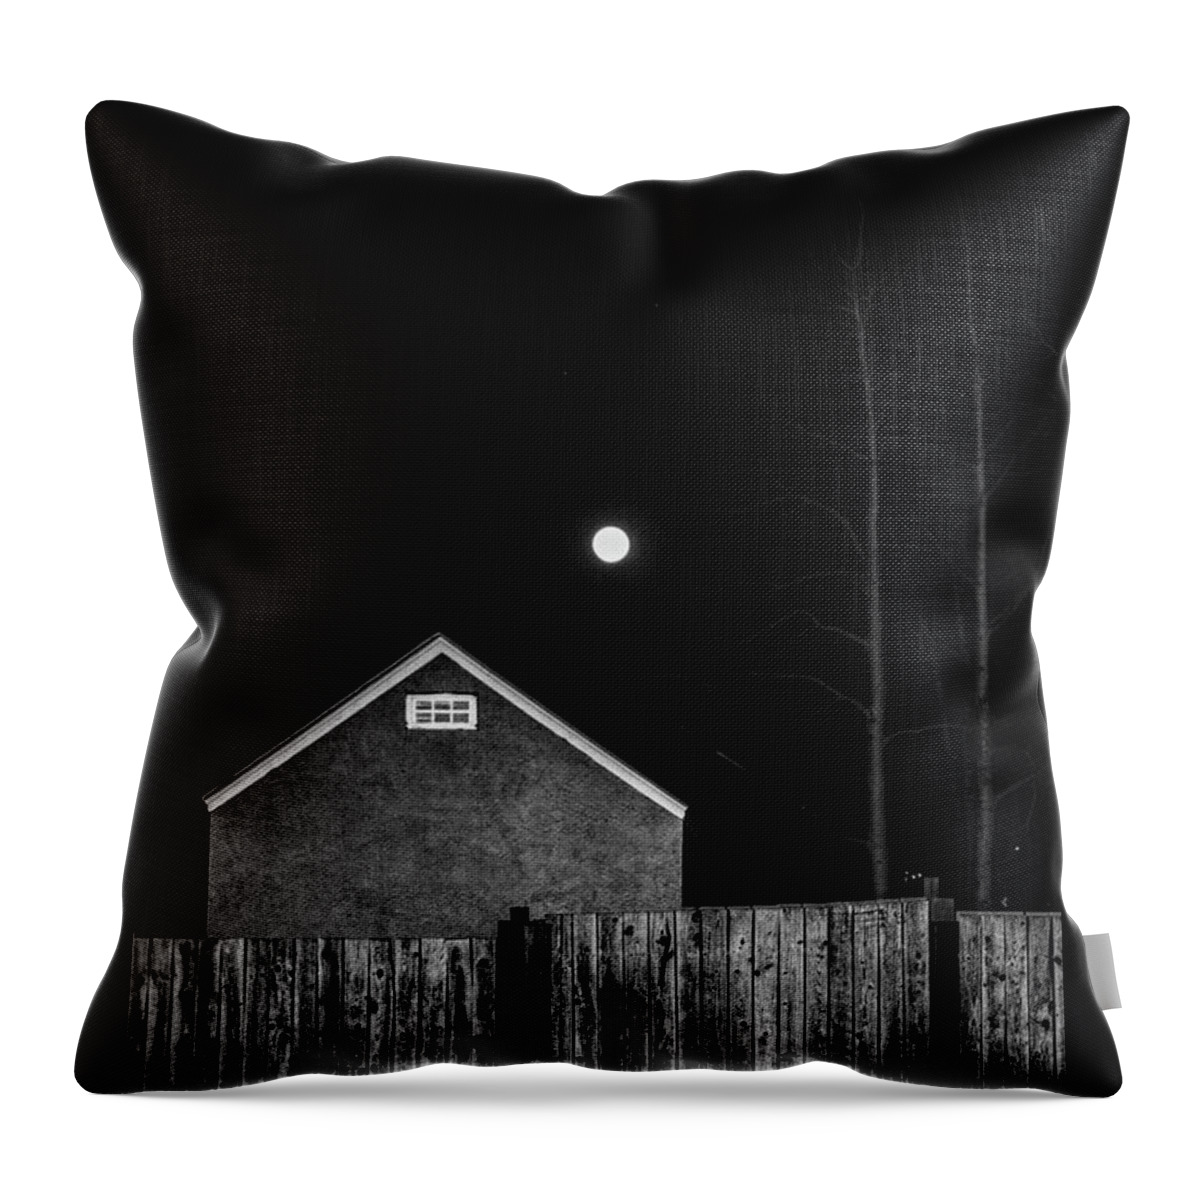 Moon And Building Throw Pillow featuring the photograph Let's Dance by Sandra Dalton